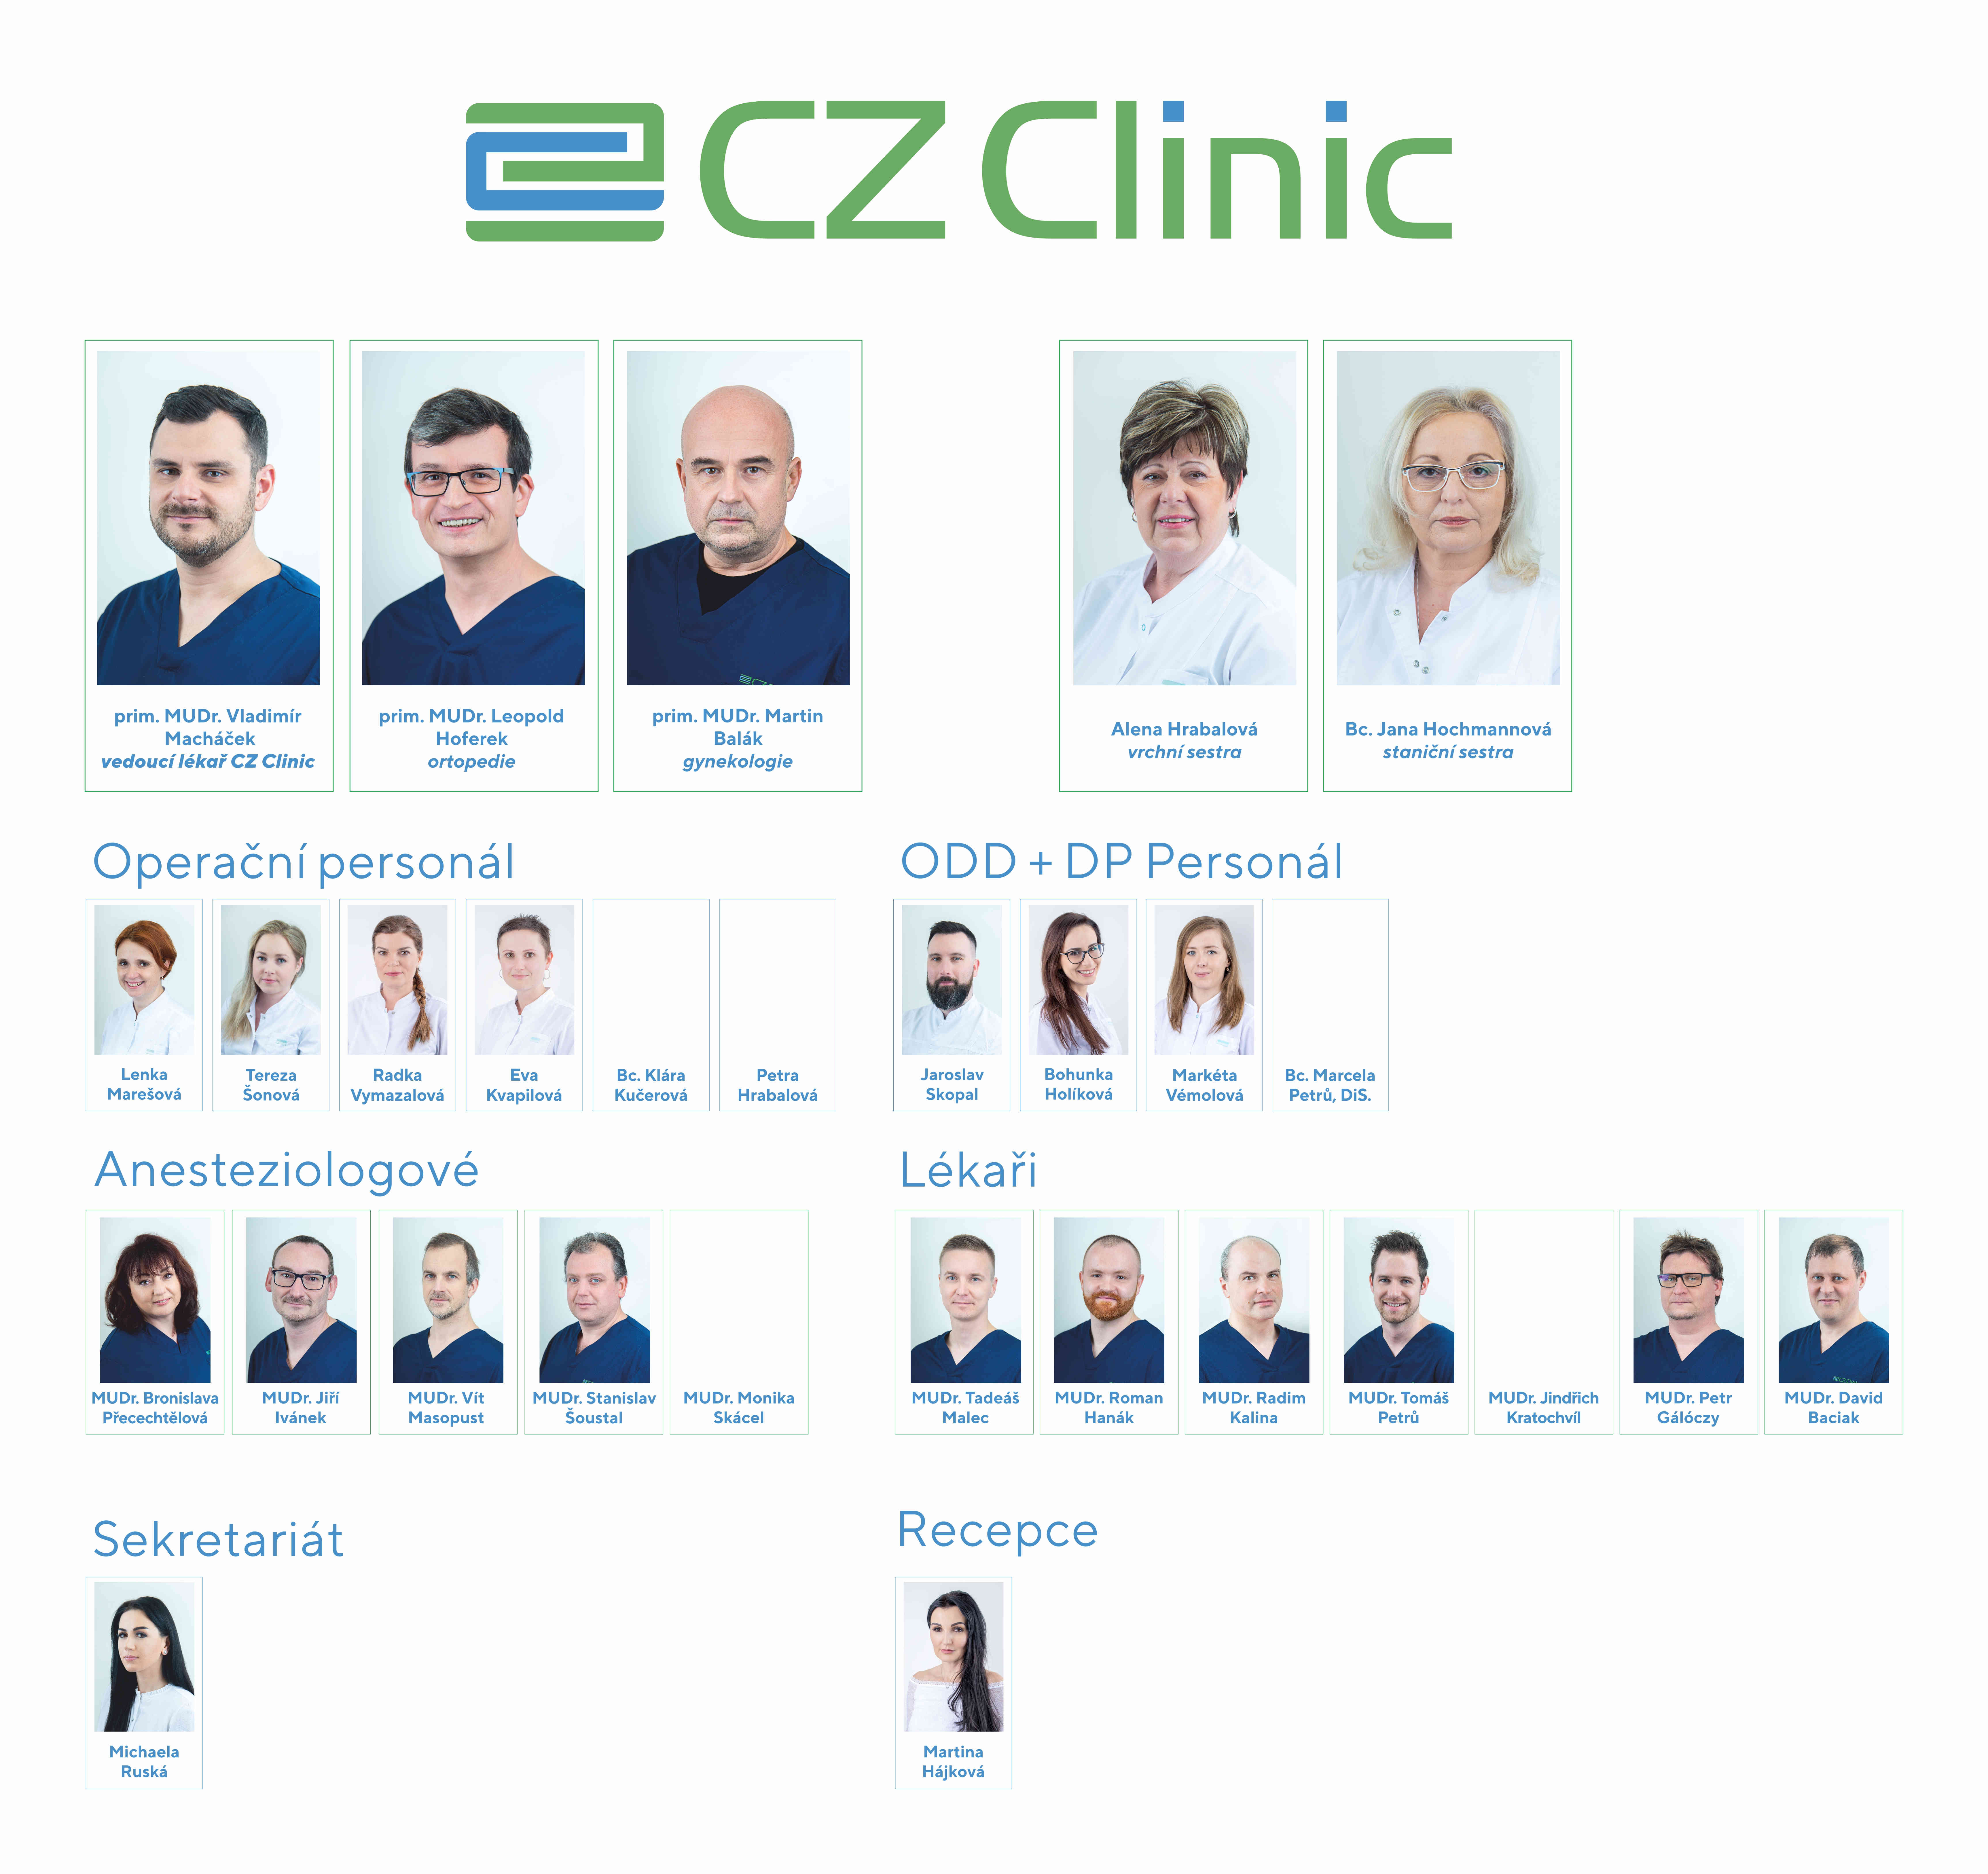 CZ Clinic personel with pictures